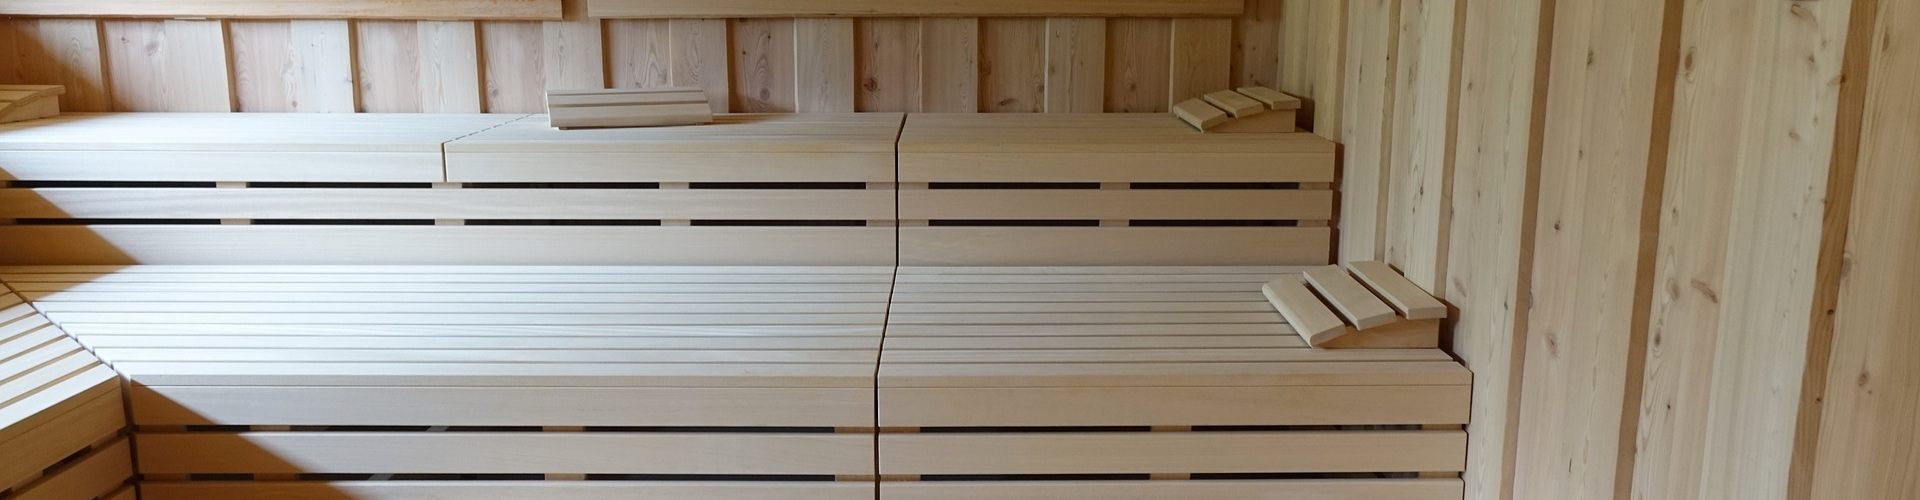 How Long Should You Stay in a Sauna?